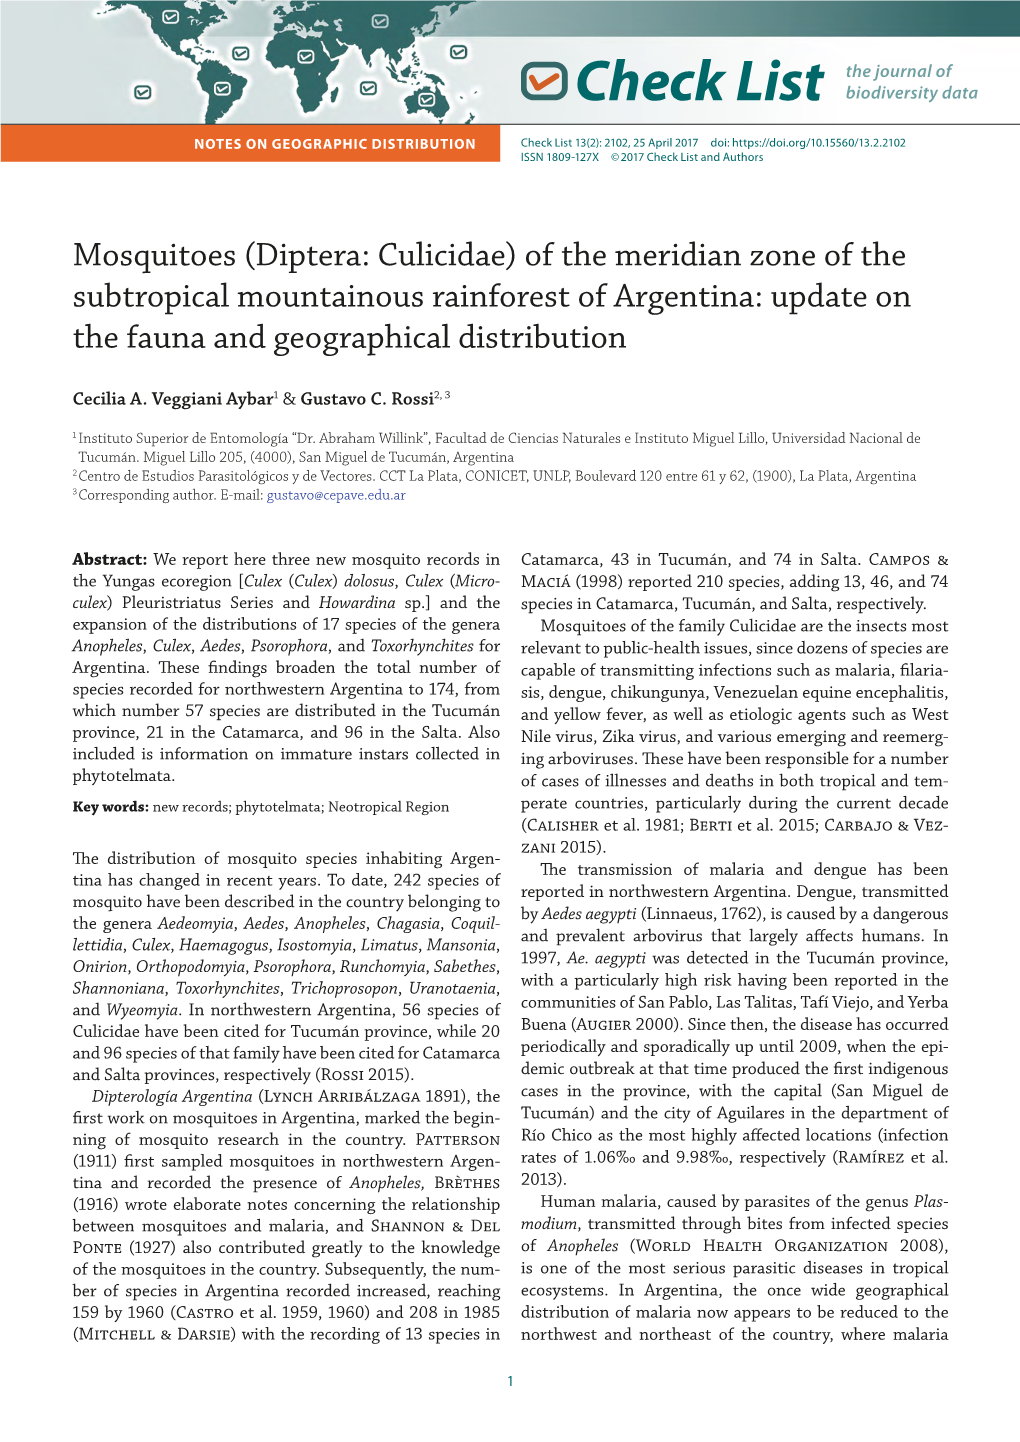 Mosquitoes (Diptera: Culicidae) of the Meridian Zone of the Subtropical Mountainous Rainforest of Argentina: Update on the Fauna and Geographical Distribution